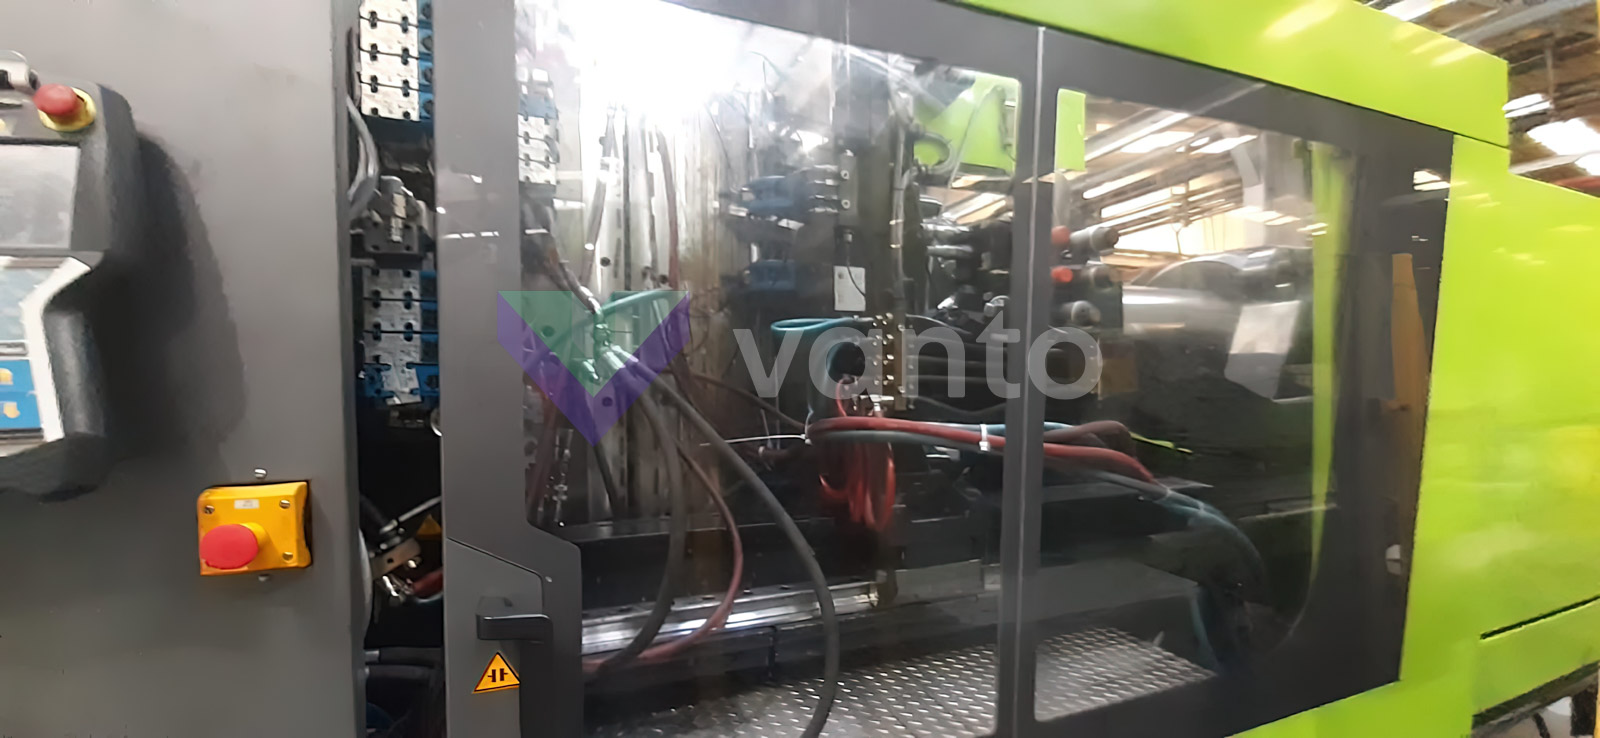 ENGEL VICTORY VC 8160 500 500t injection molding machine (2018) id10754